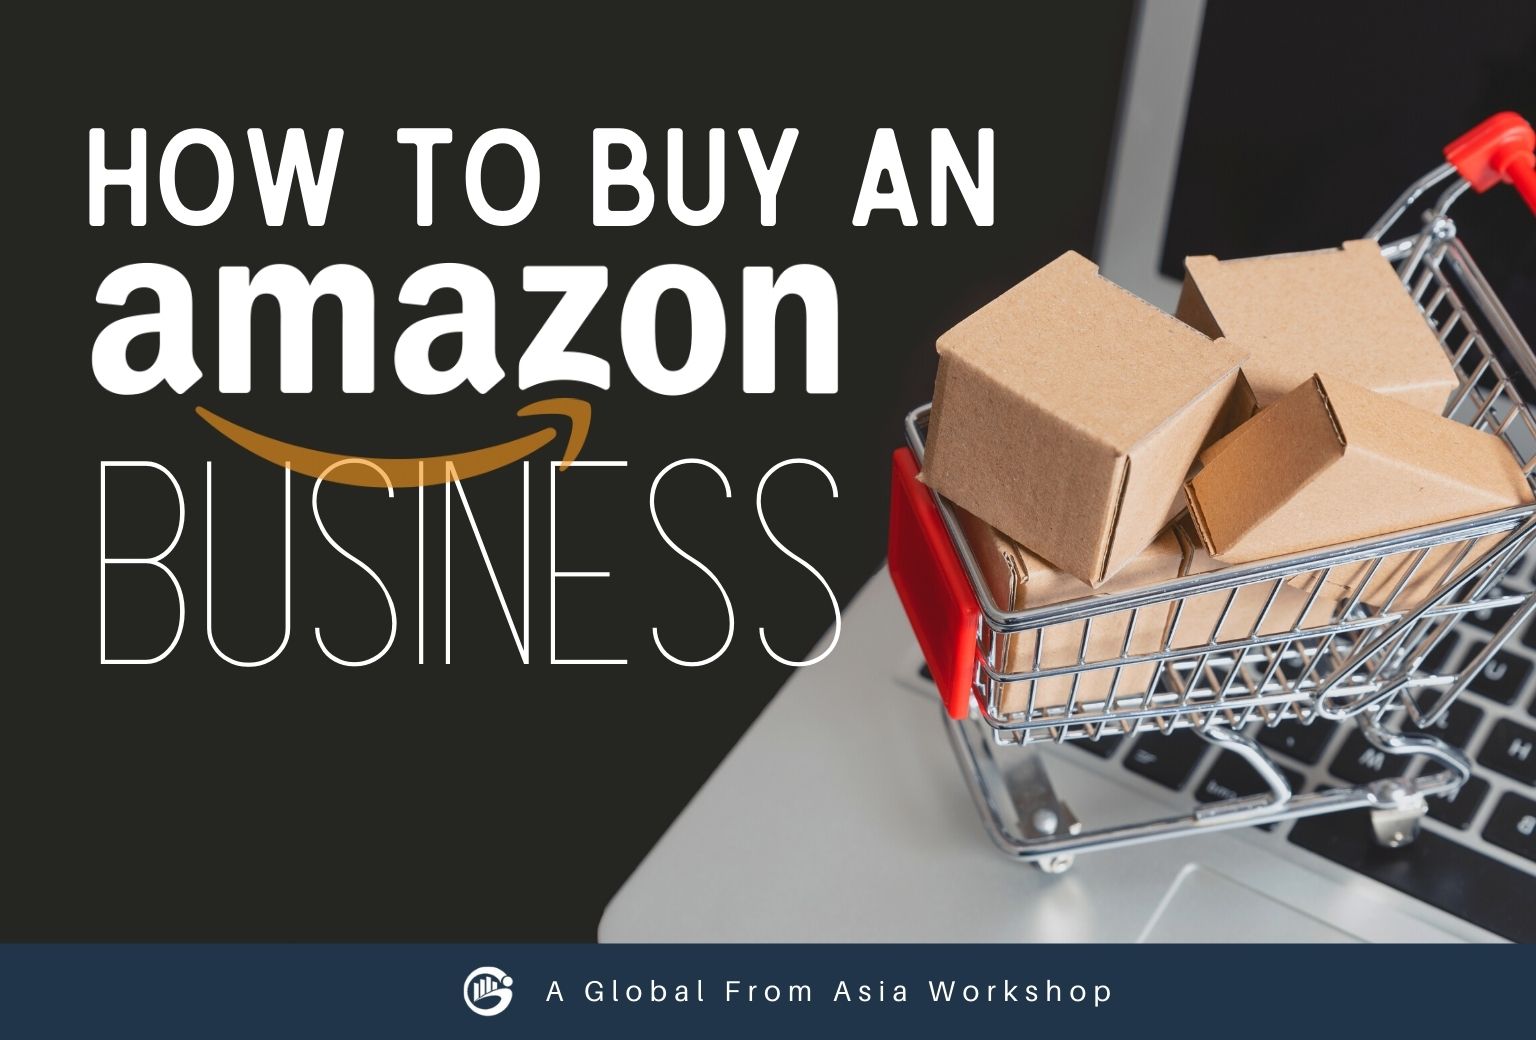 Featured image for “How to Buy an Amazon Business”